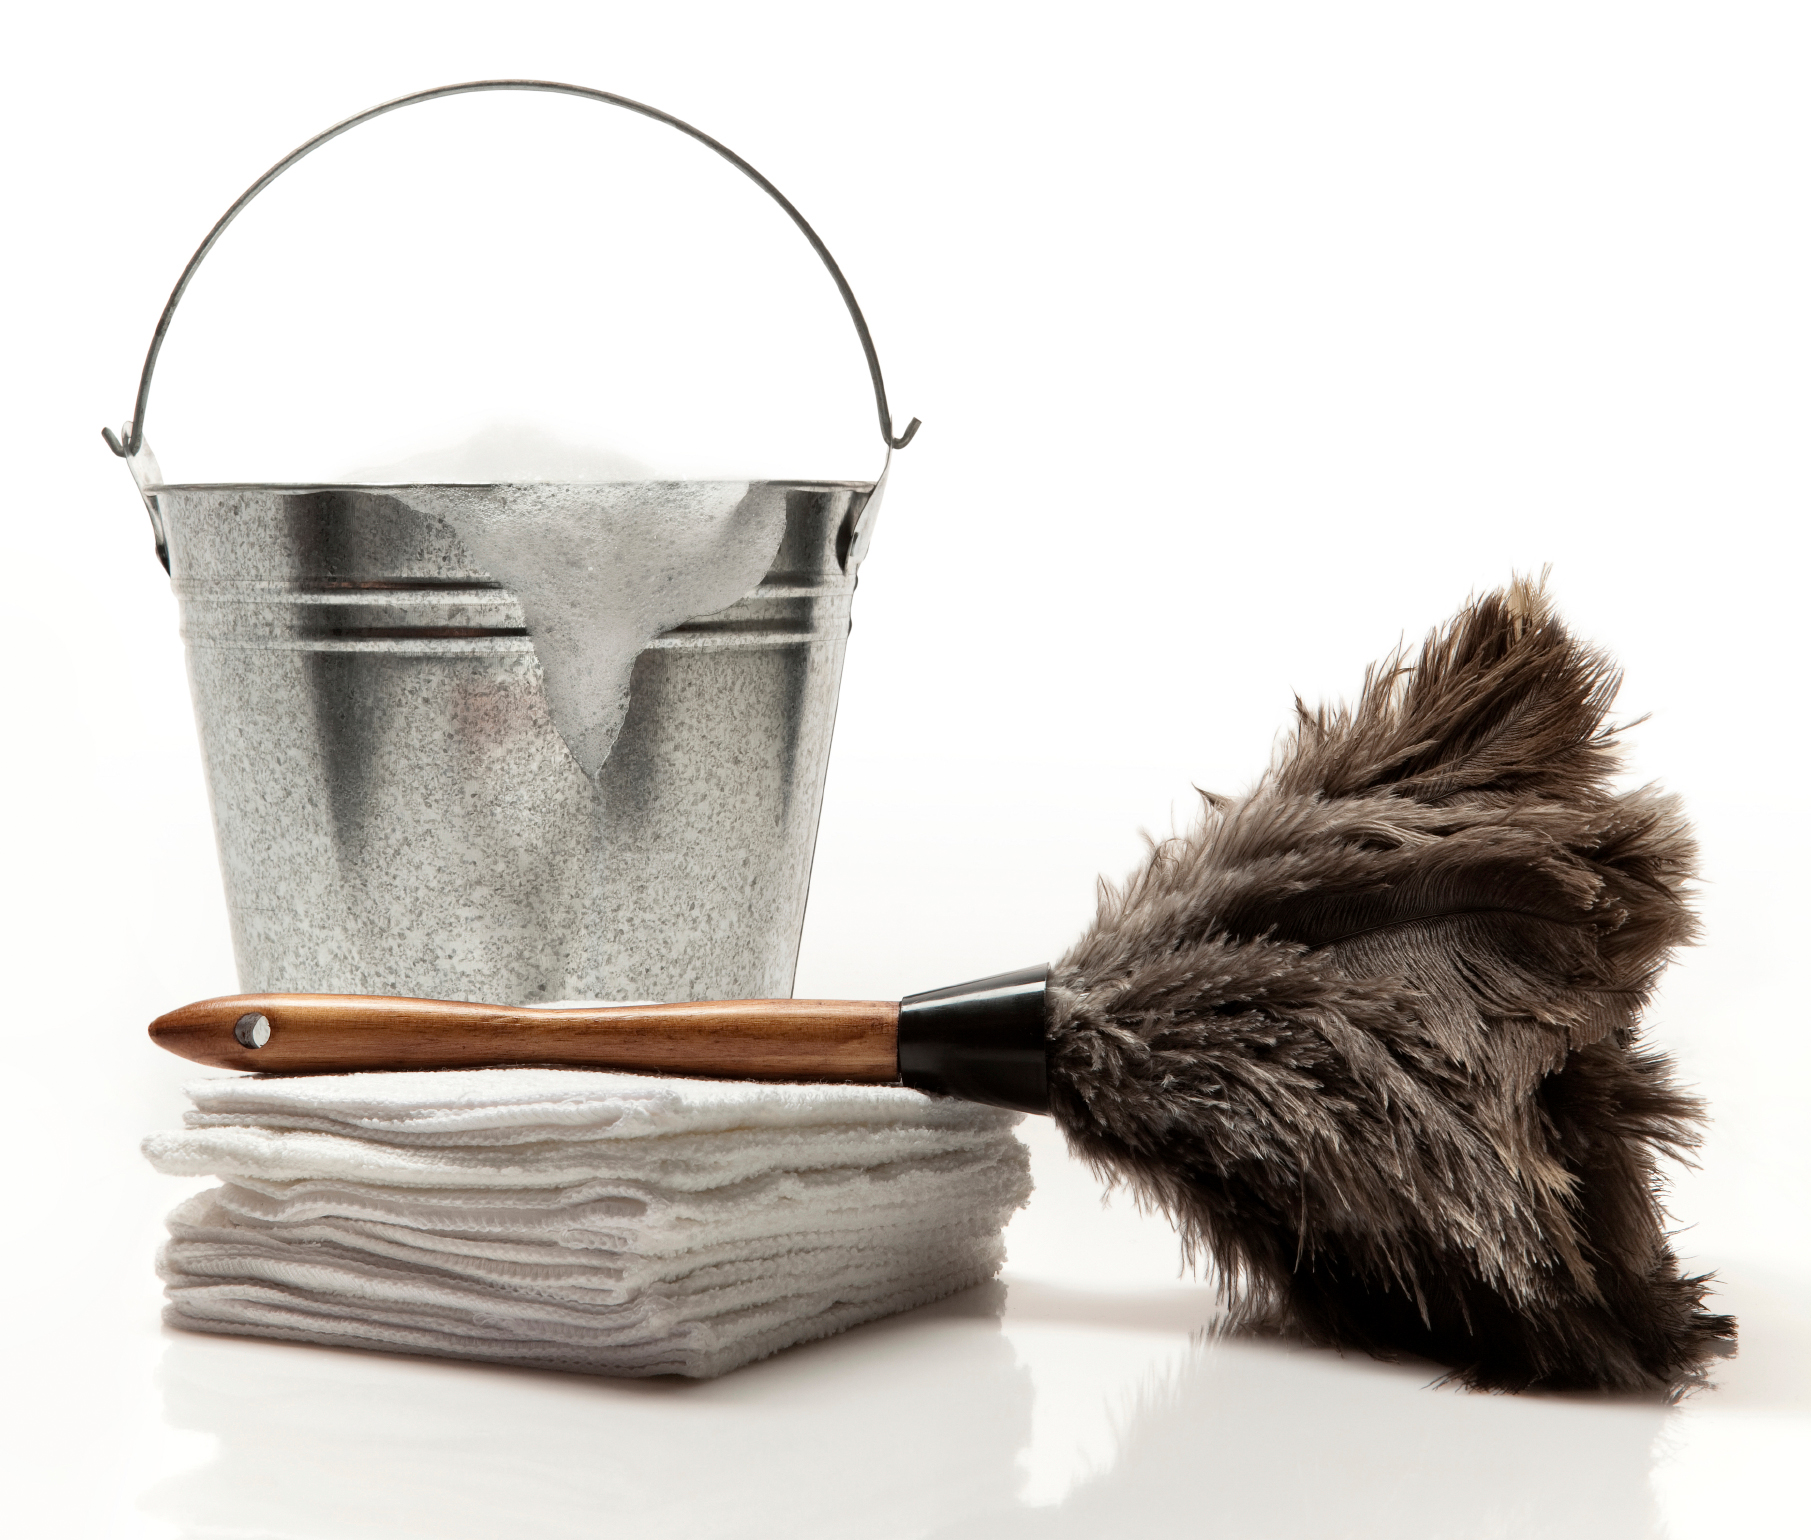 Metal pail bucket with soapy suds dripping out next to pile of cleaning towels and a feather duster